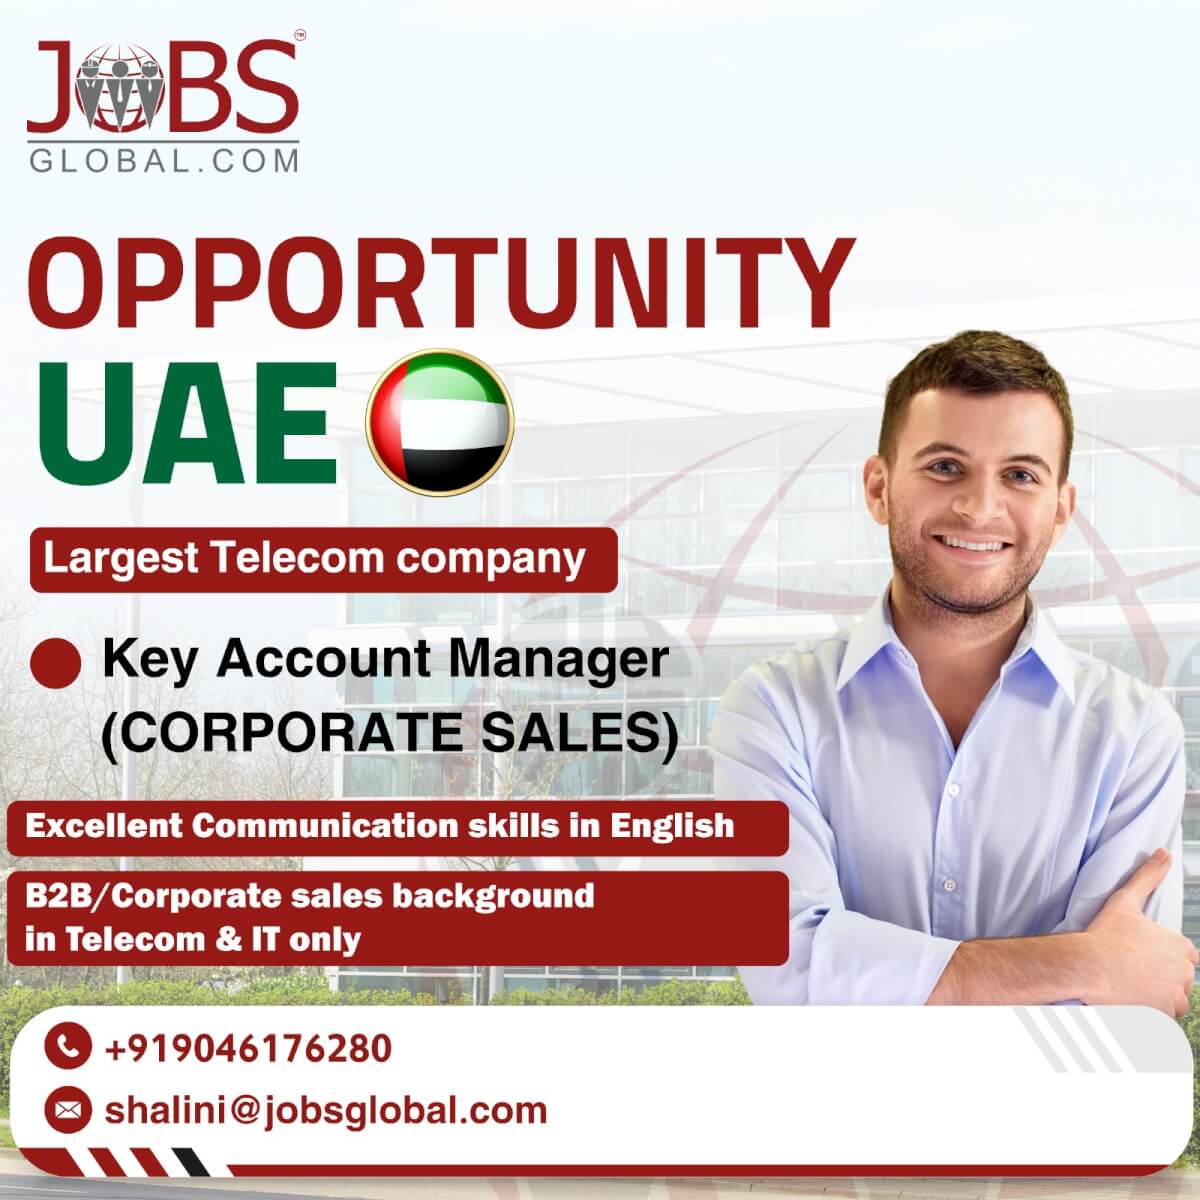 KEY ACCOUNT MANAGER (CORPORATE SALES)